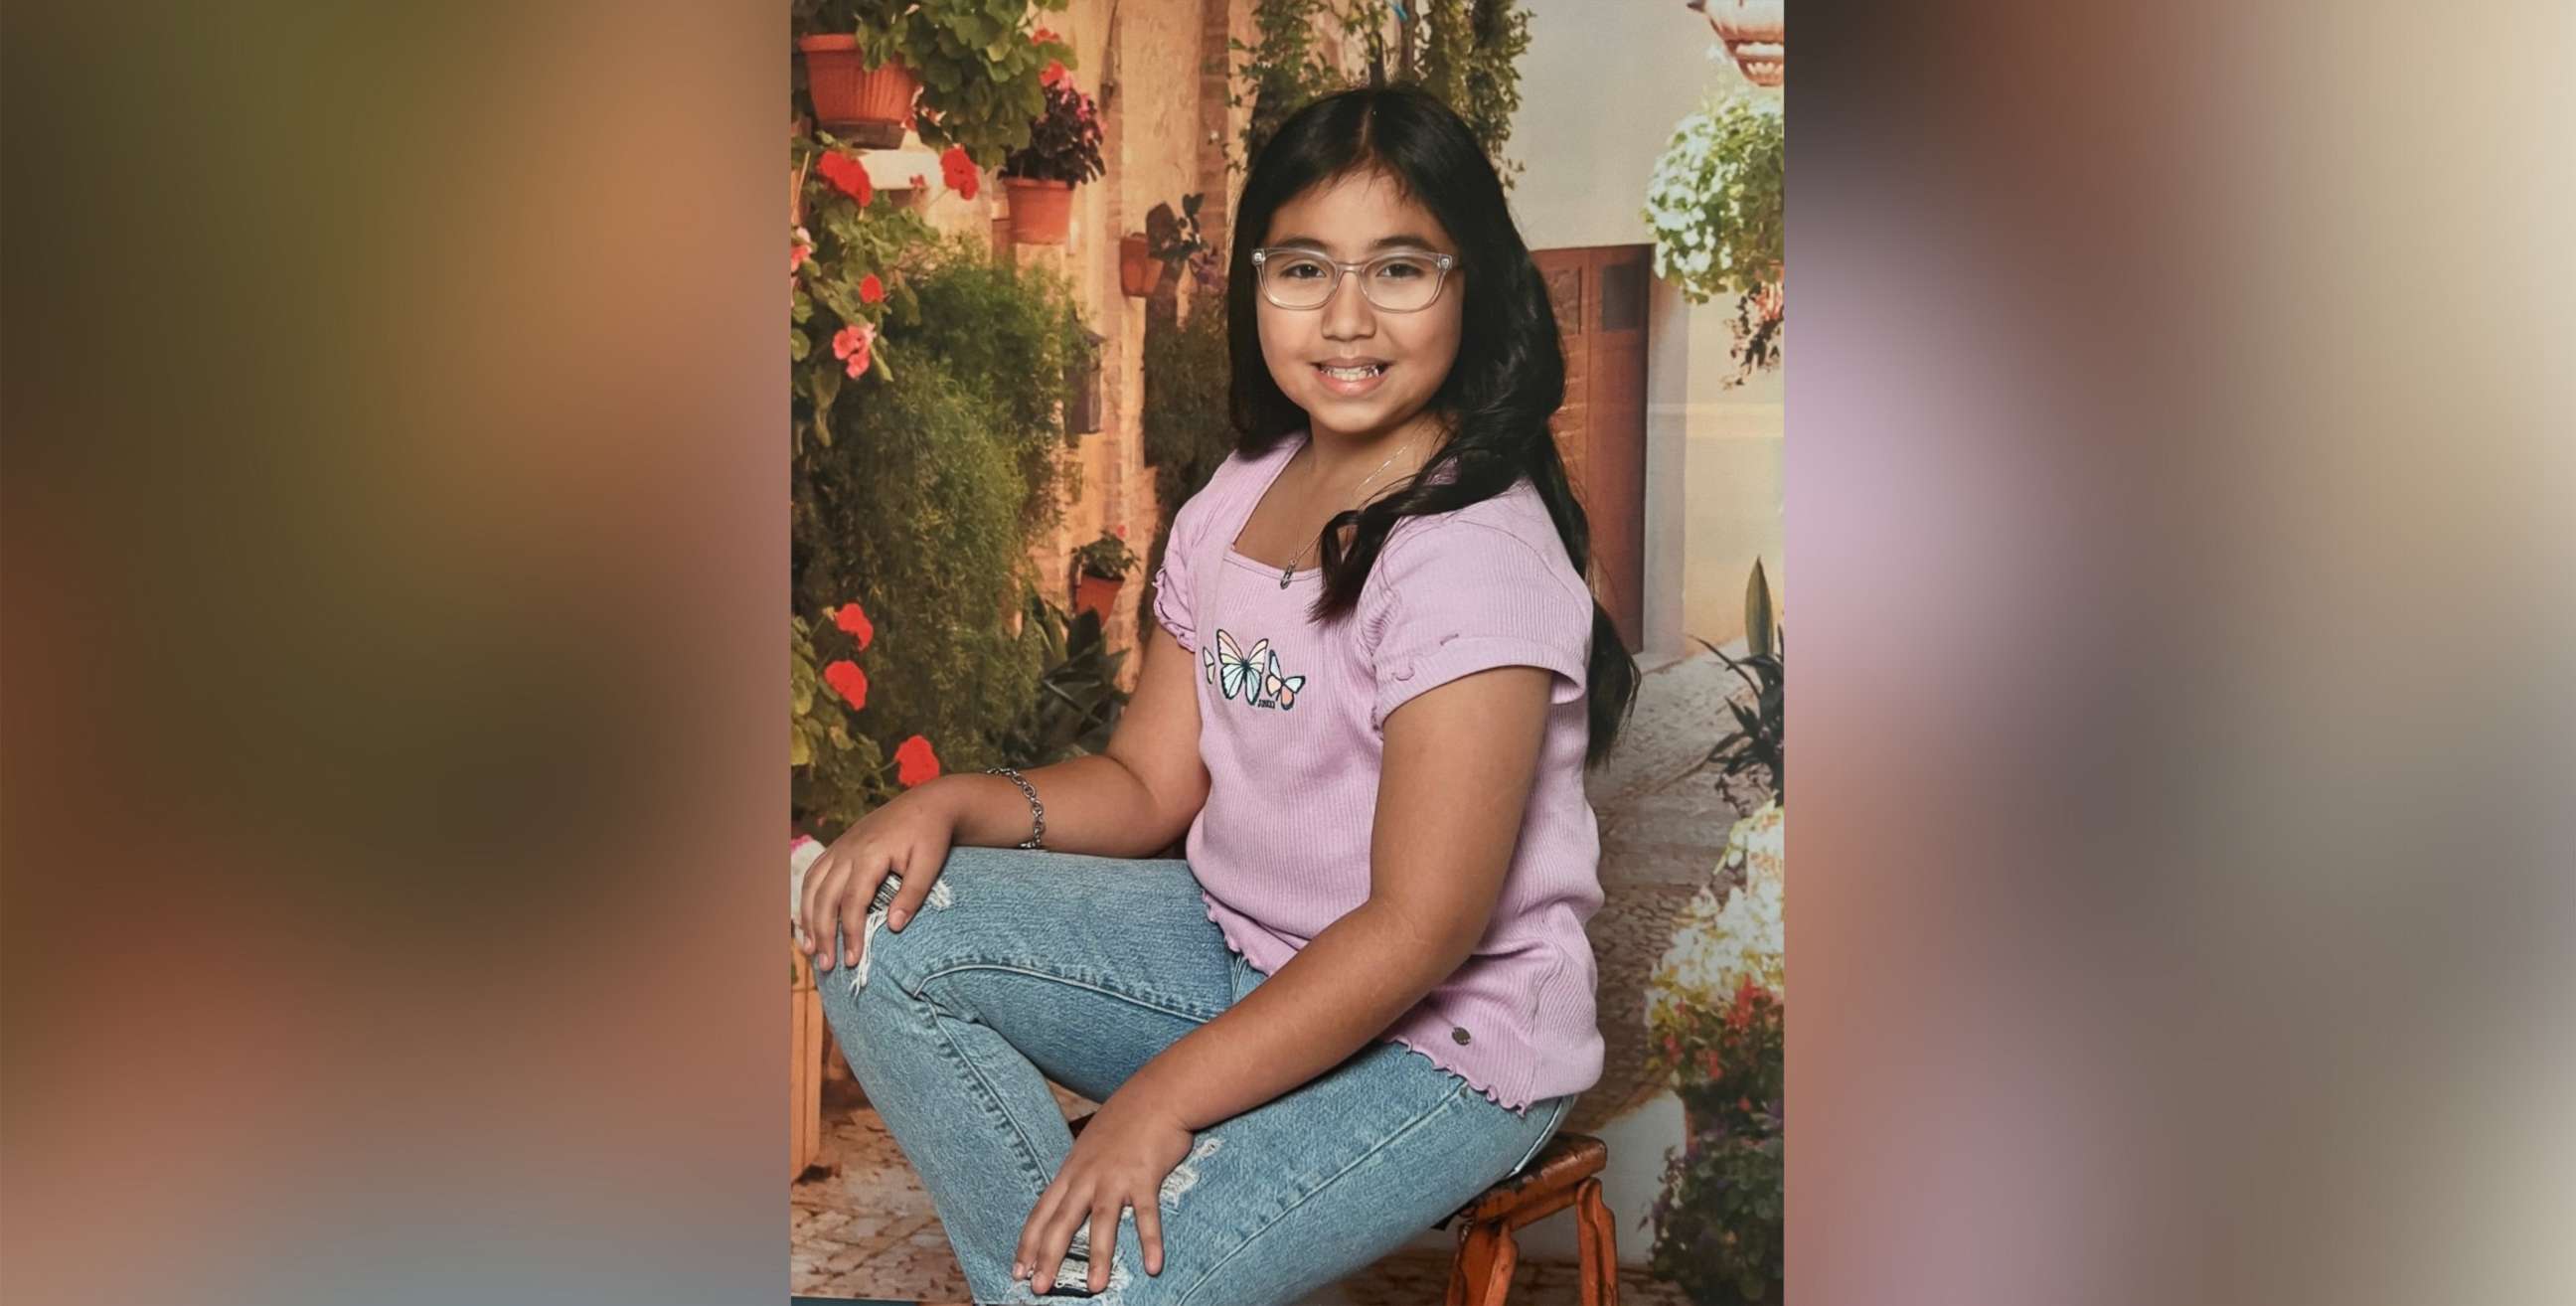 PHOTO: Tess Mata, one of the victims of the mass shooting Robb Elementary School in Uvalde, Texas is seen in this undated photo.